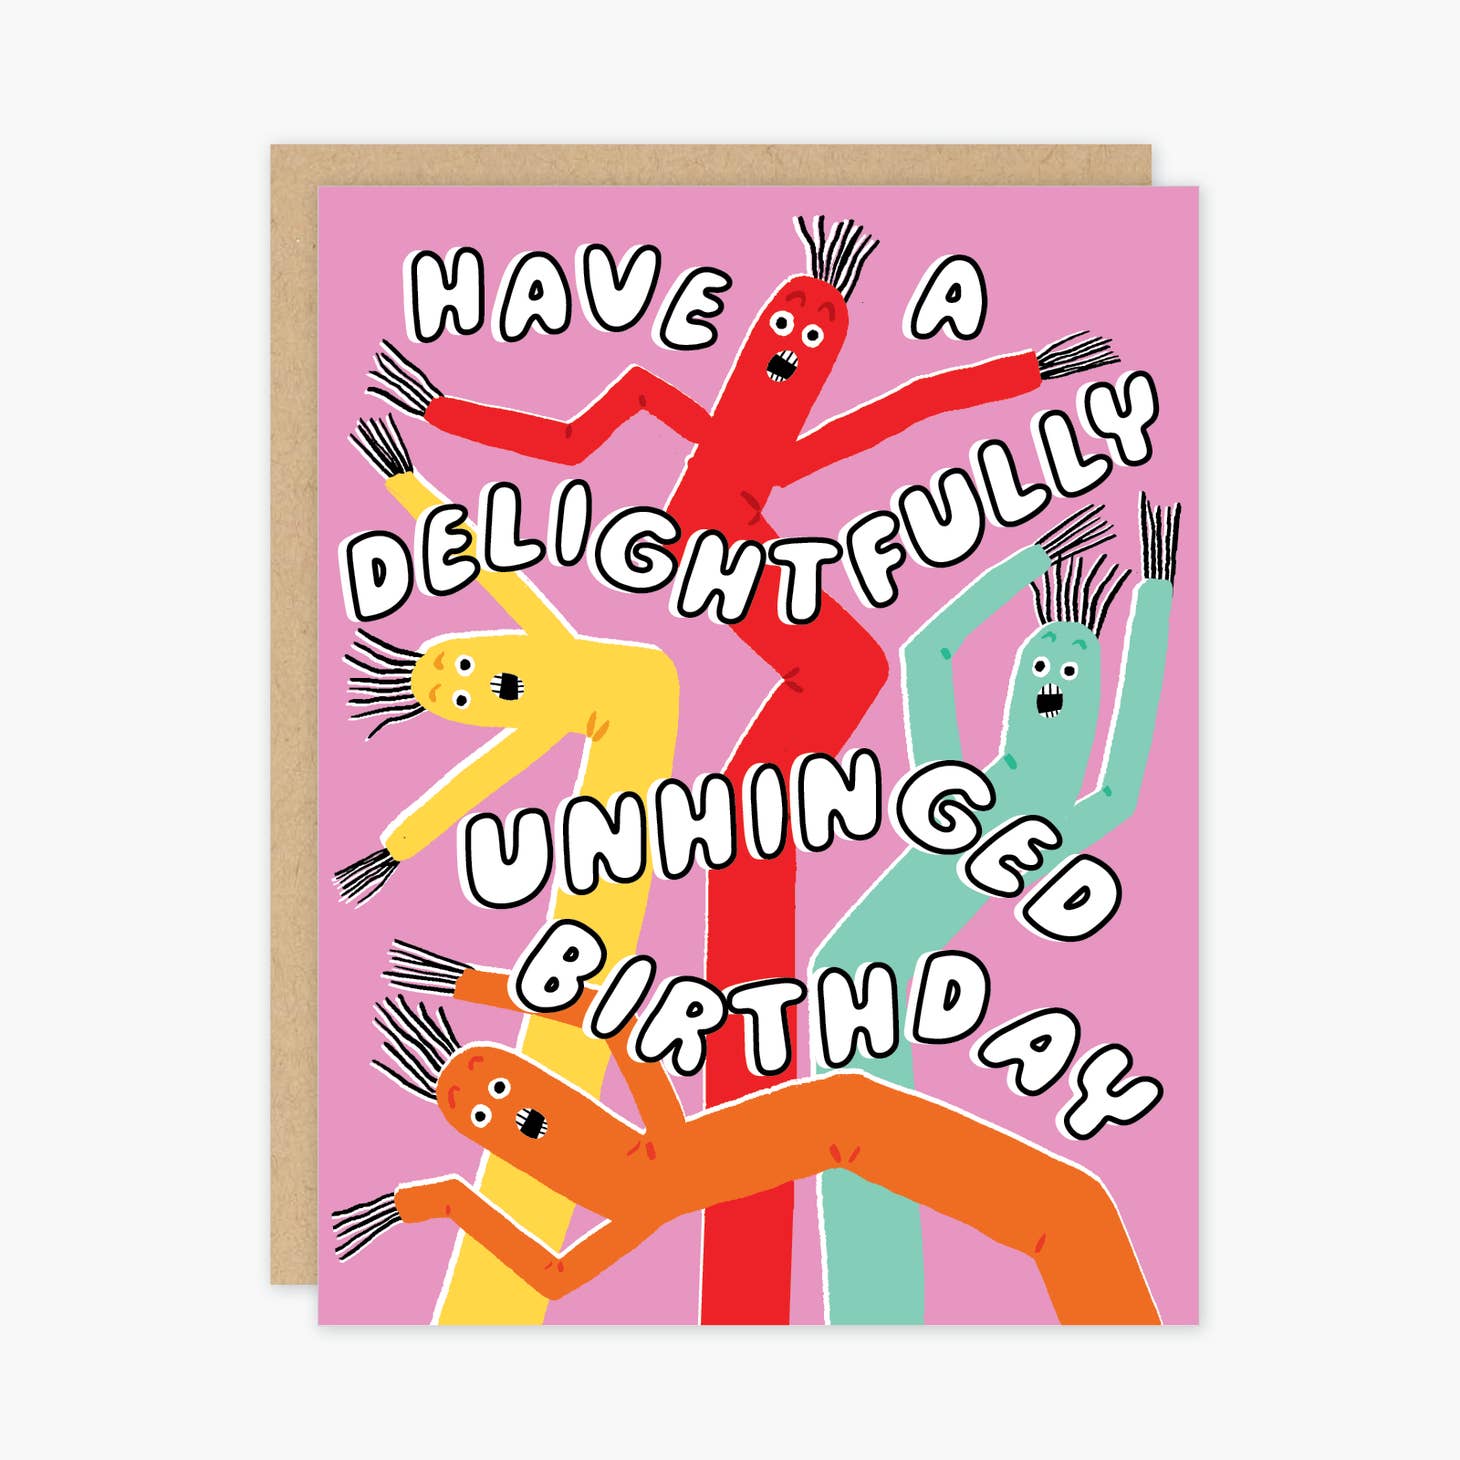 Pink background with image of red, yellow, mind and orange wiggly balloons with white text says, "Have a delightful unhinged birthday". Kraft envelope included. 